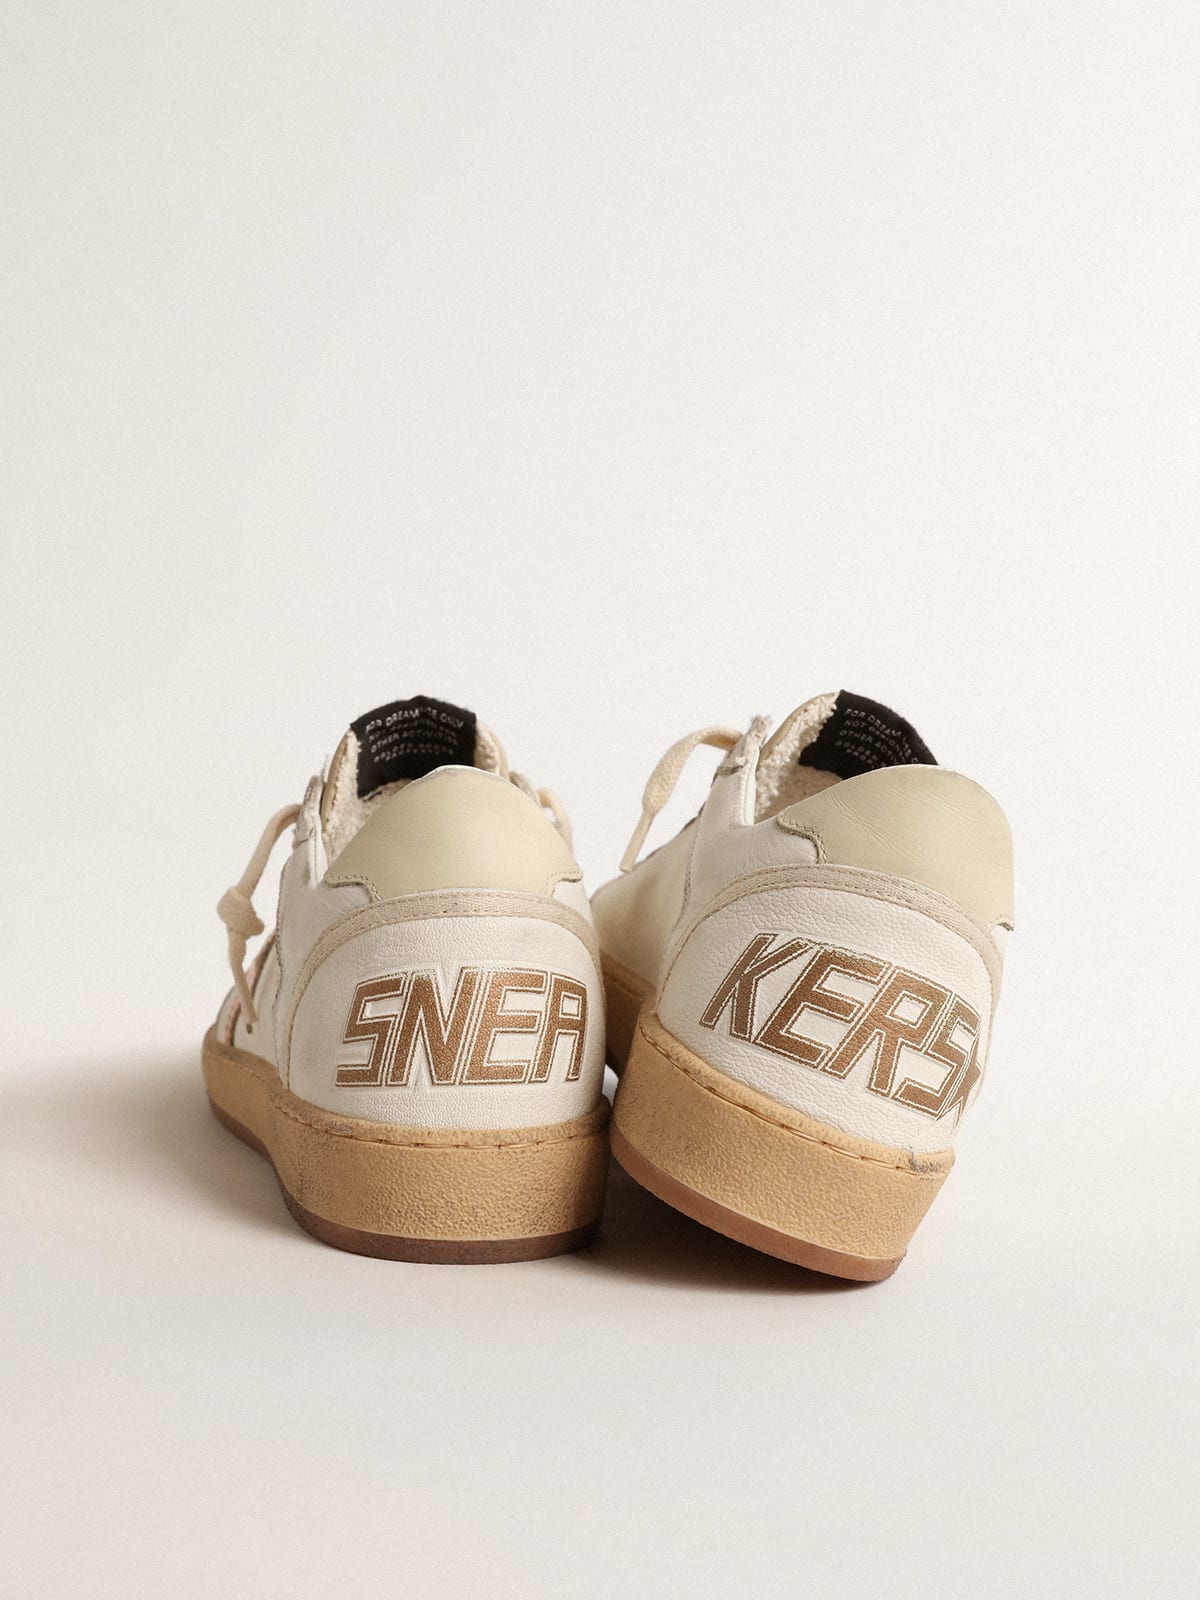 Golden Goose - Ball Star in canvas and nappa with bronze metallic leather star in 